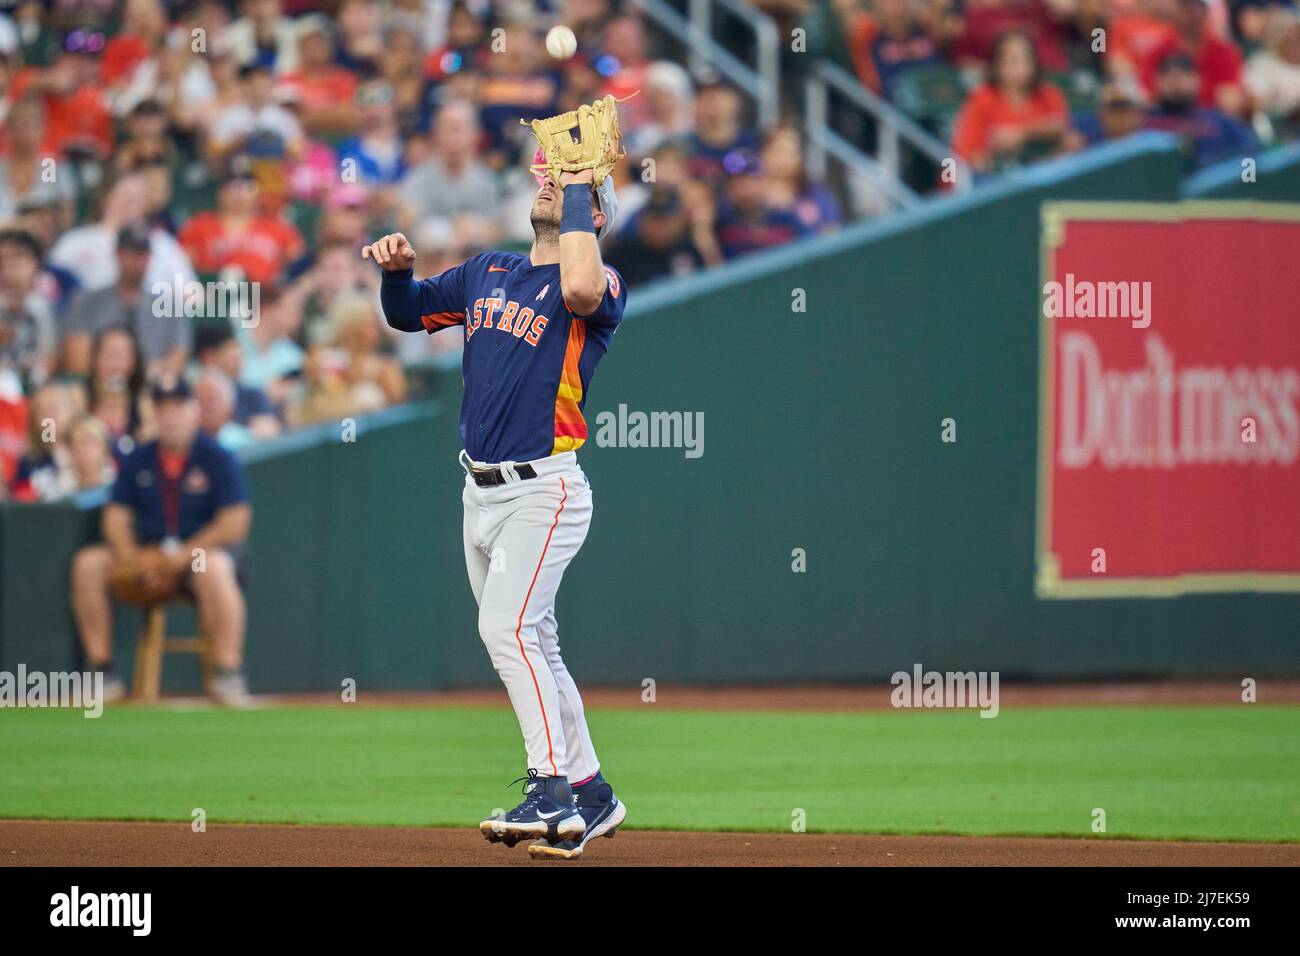 Houston Tx. 08/05/2022, May 8 2022: Houston third baseman Alex Bergman (2) makes a play during the game with Detroit Tigers and Houston Astros held at Minute Maid Park in Houston Tx. David Seelig/Cal Sport Medi Stock Photo